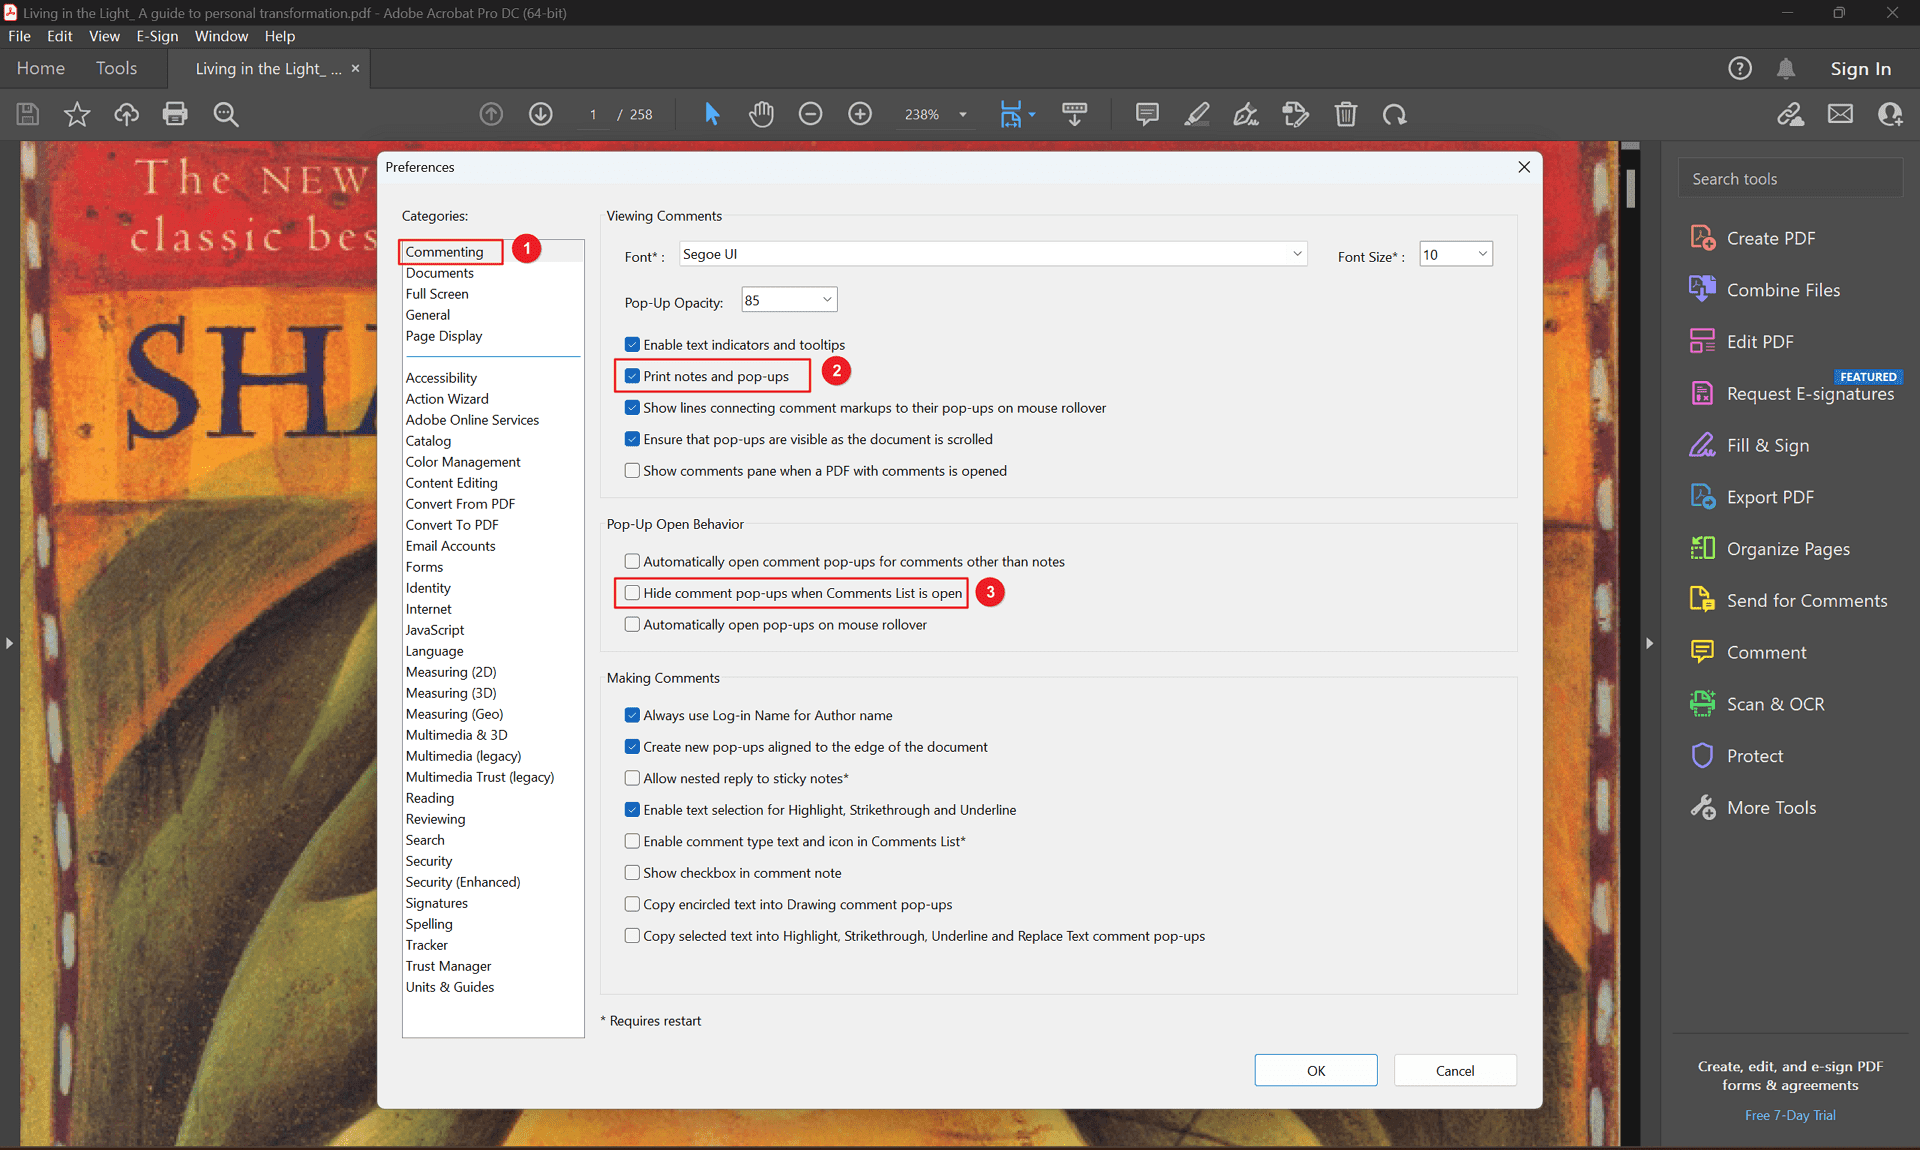 Under Viewing Comments, check the box next to "Print notes and pop-ups". Uncheck "Hide comment pop-ups when Comments List is open" if you want the comment pop-up boxes to appear on the printout.